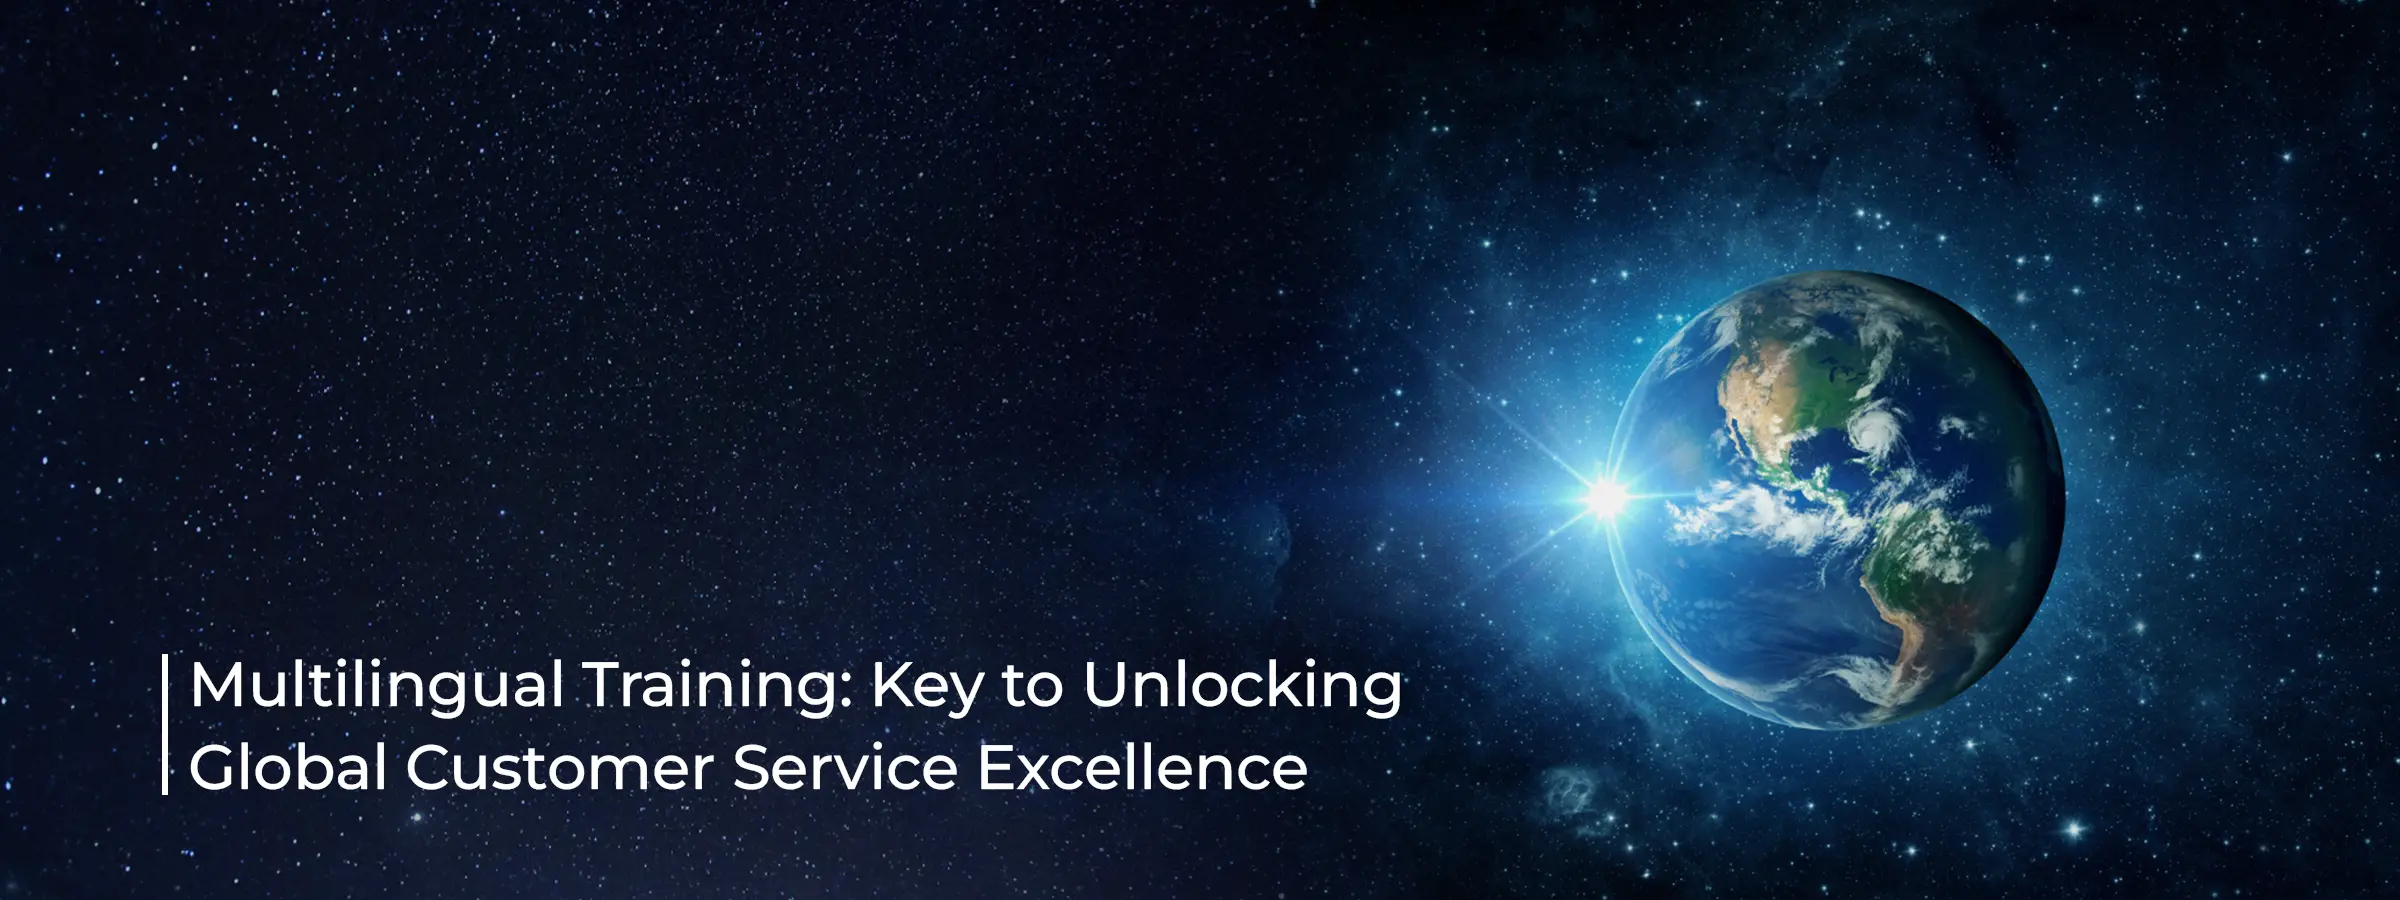 multilingual-training-key-to-unlocking-global-customer-service-excellence